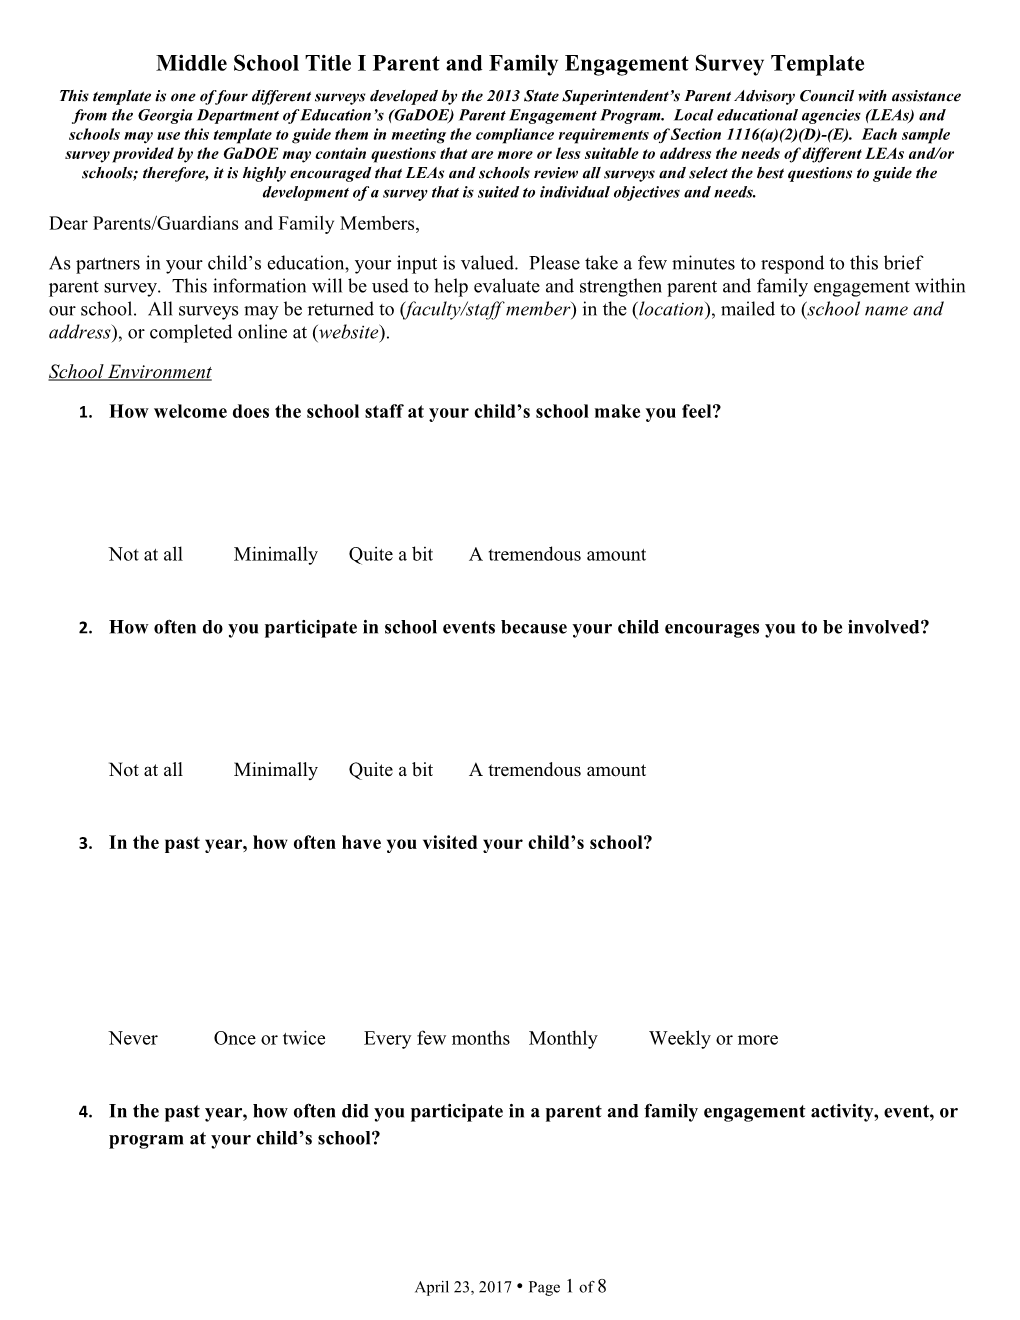 Middle School Title I Parent and Family Engagementsurvey Template